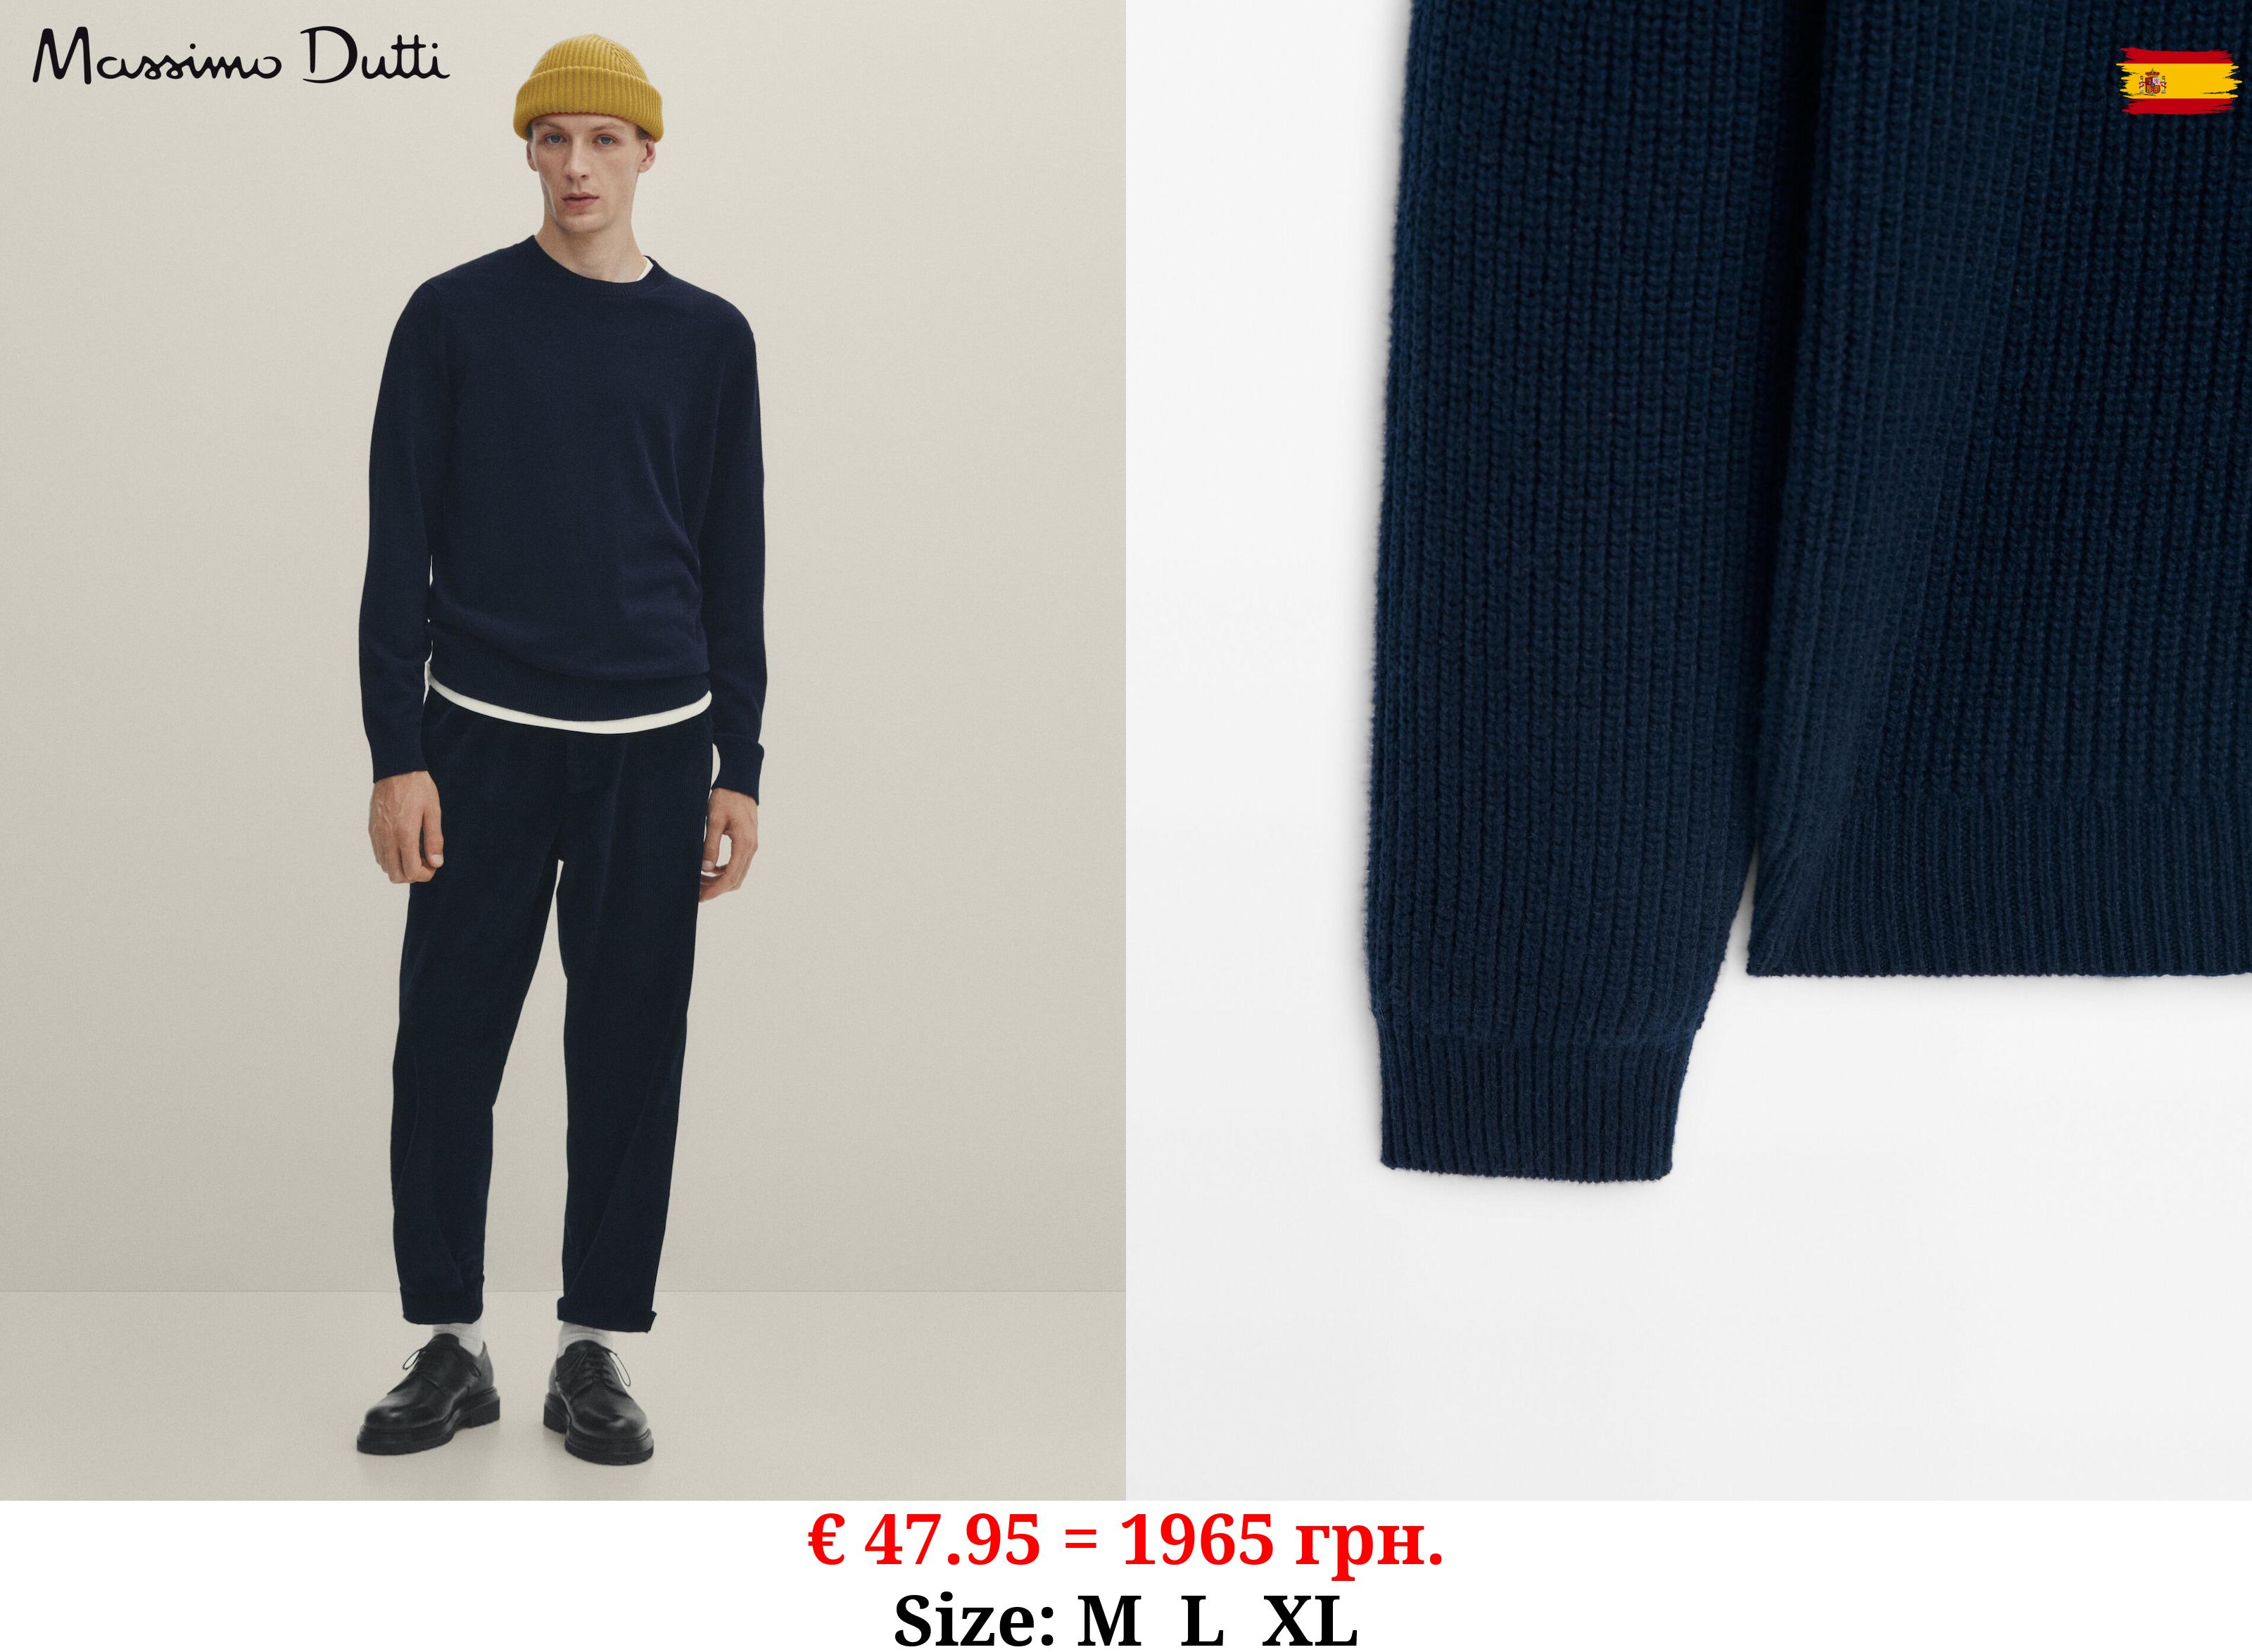 Purl-knit cotton and wool blend sweater NAVY BLUE